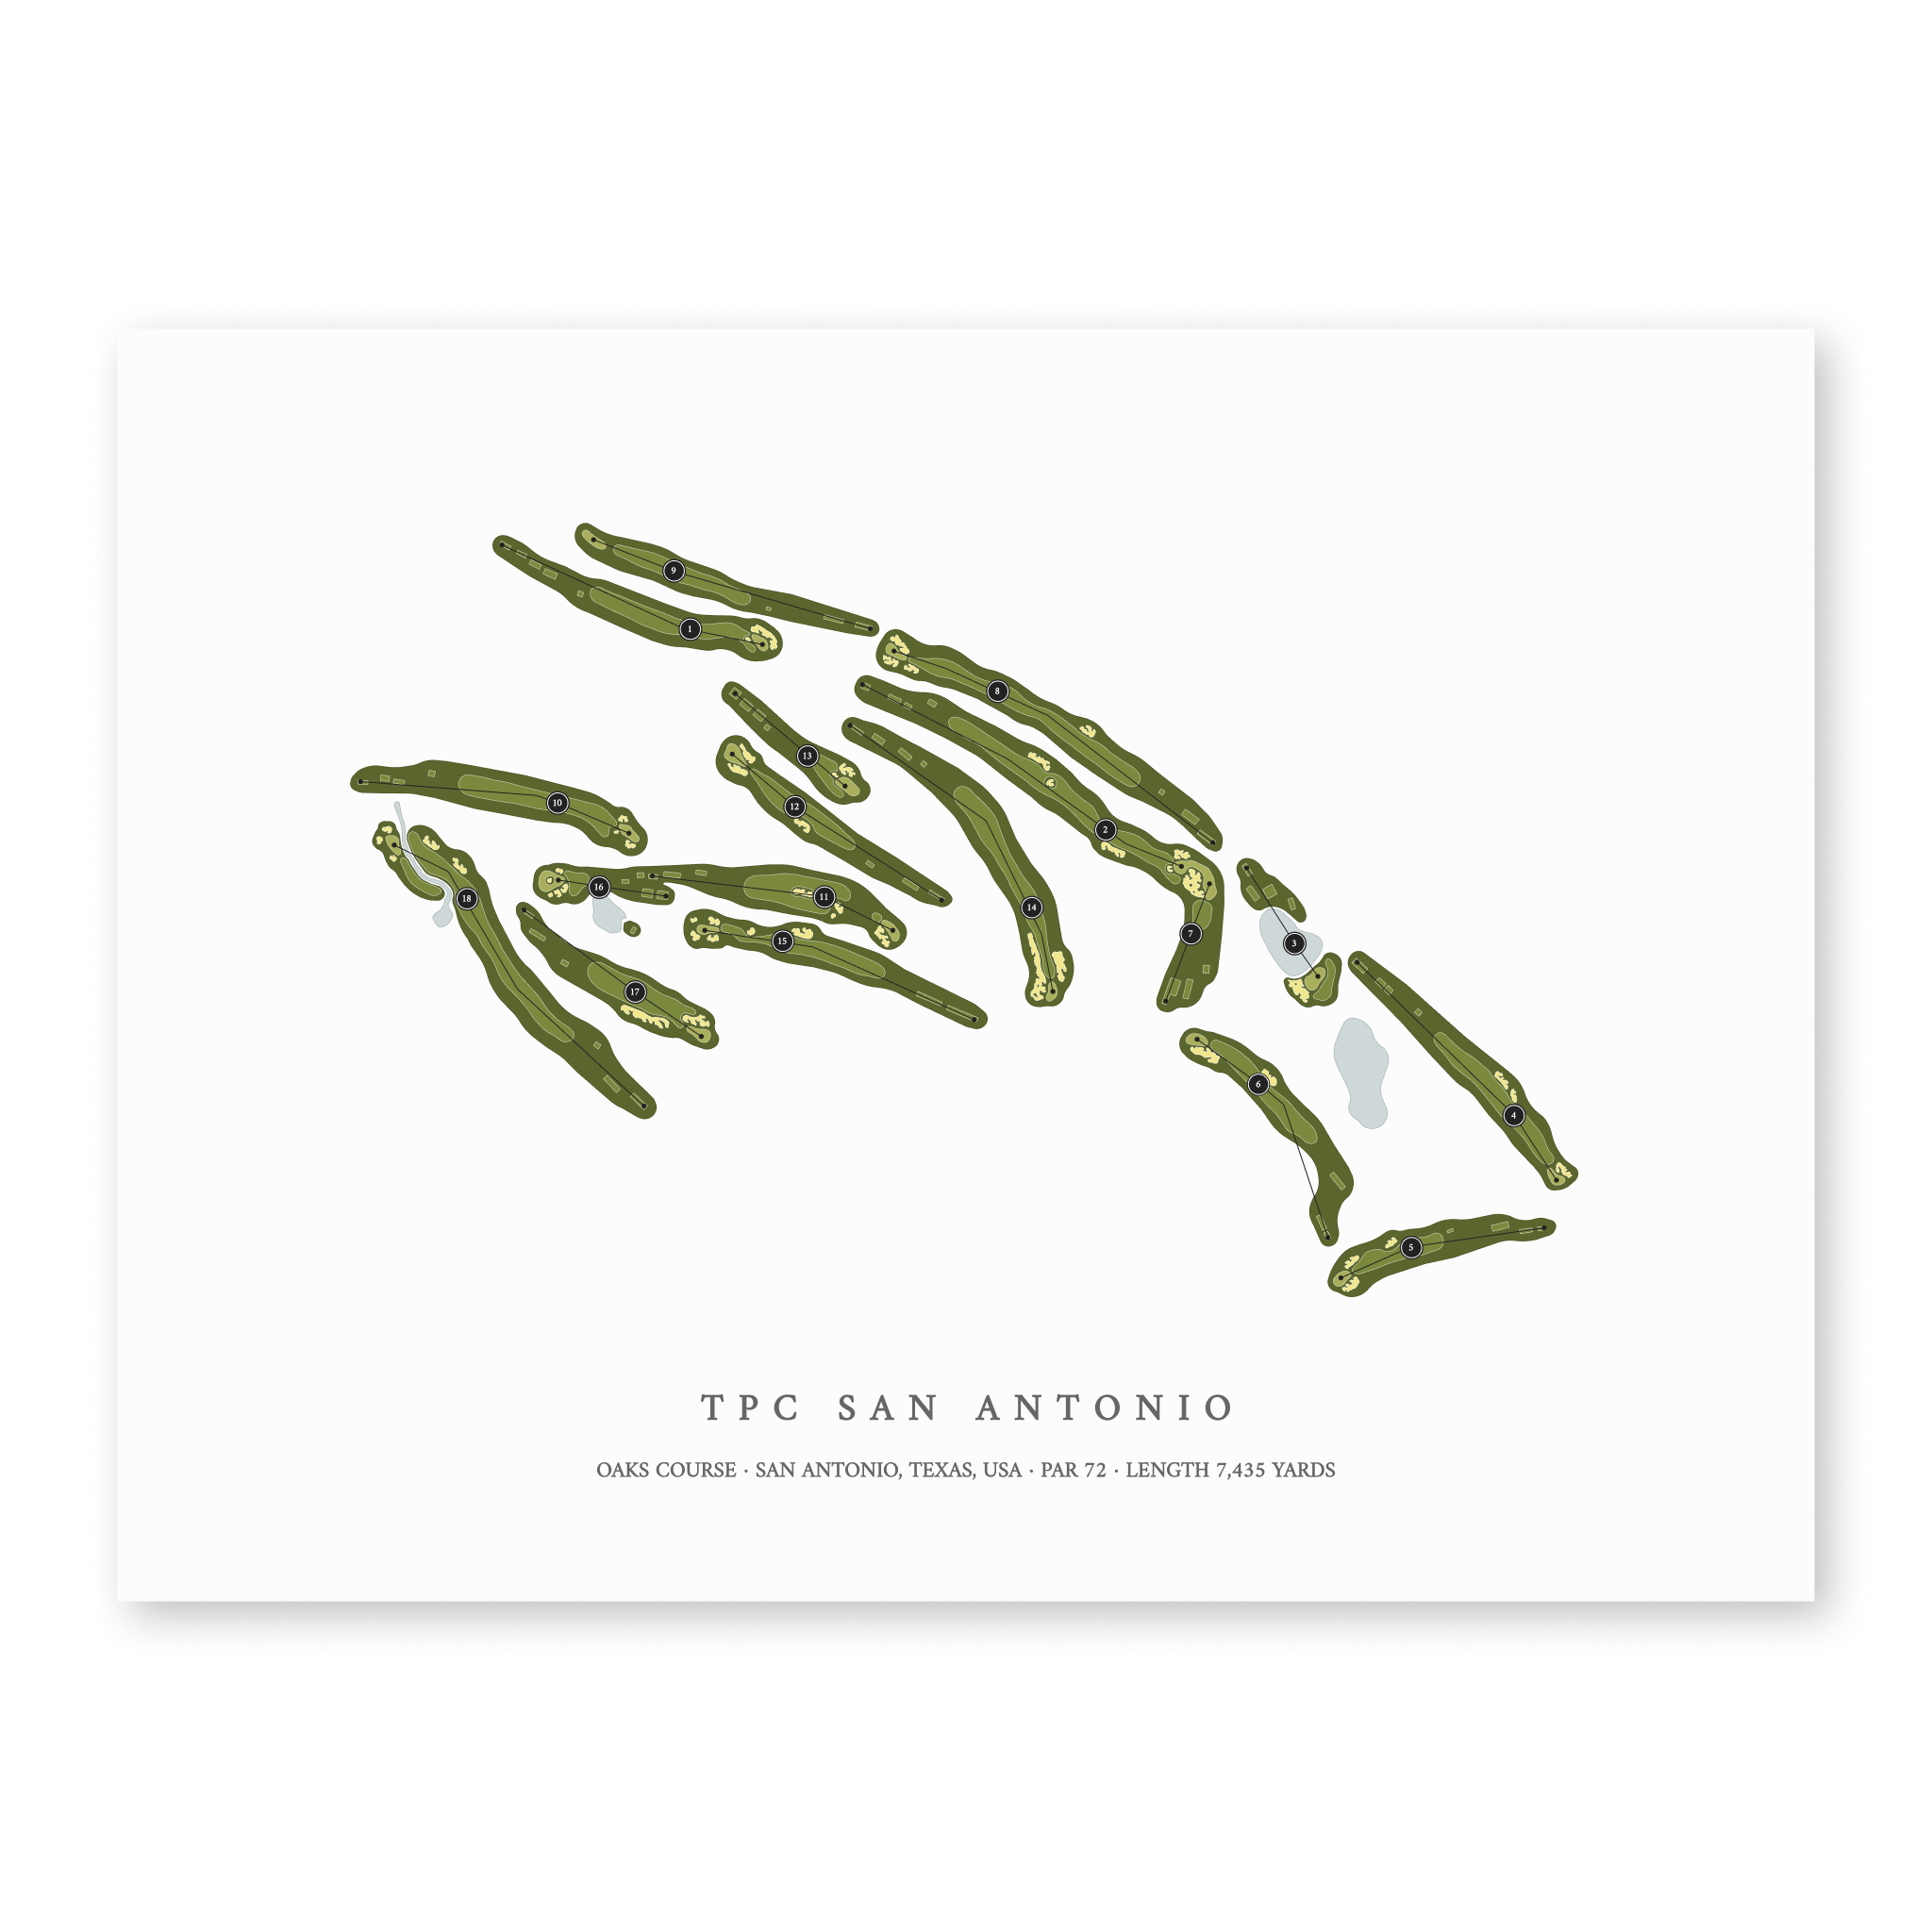 TPC San Antonio - Oaks Course| Golf Course Print | Unframed With Hole Numbers #hole numbers_yes